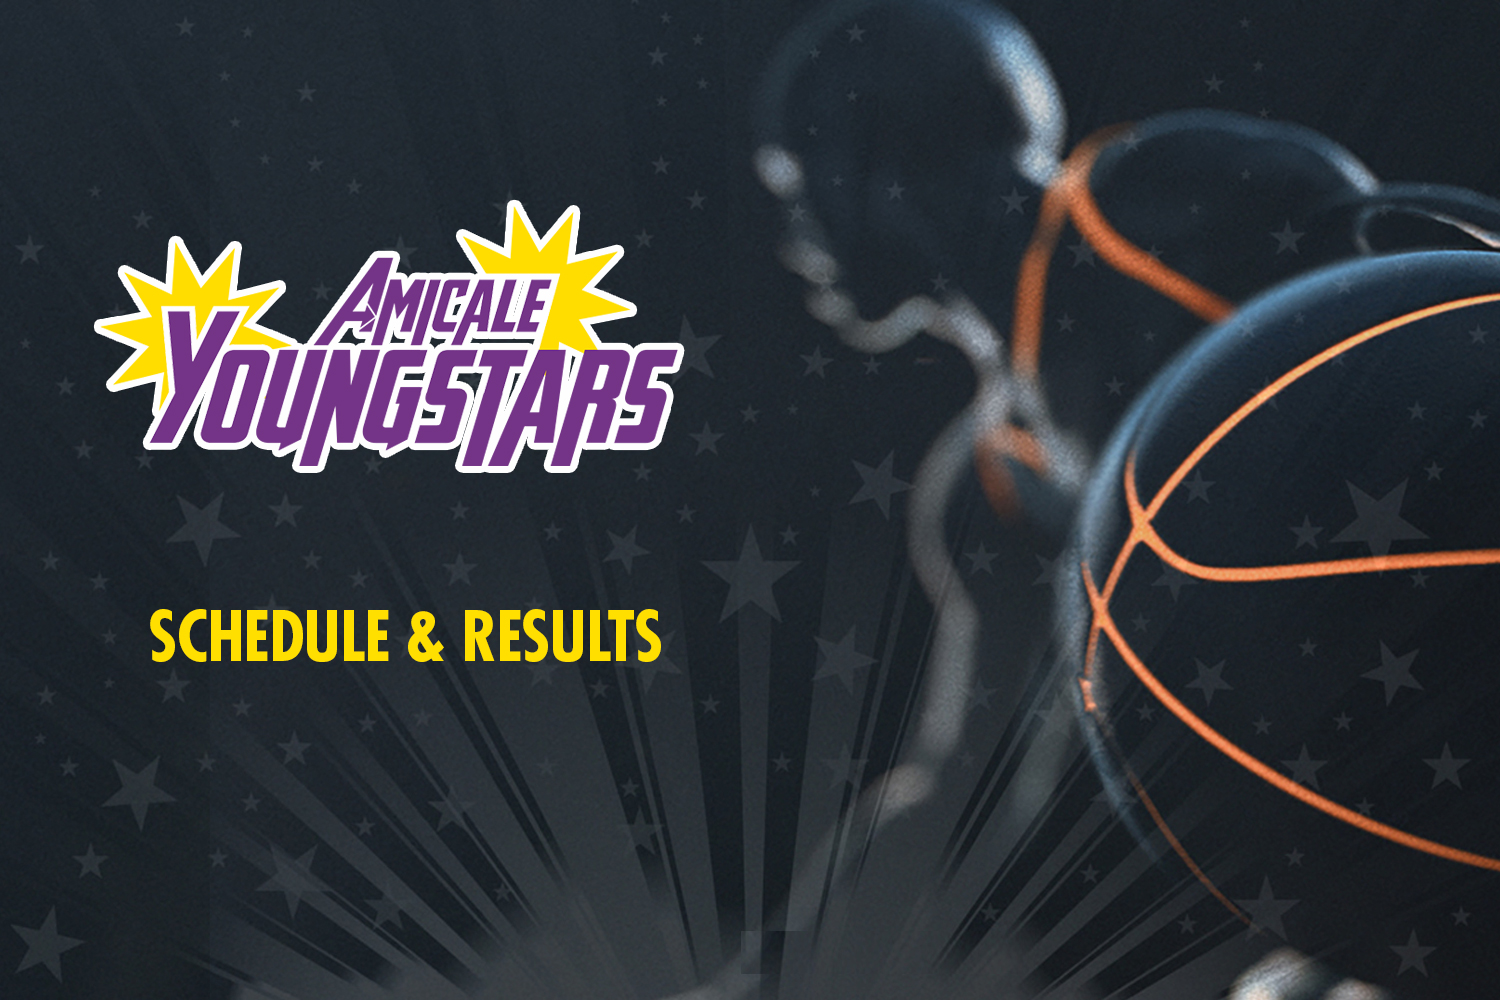 Featured image for “Youngstars Schedule & Results”